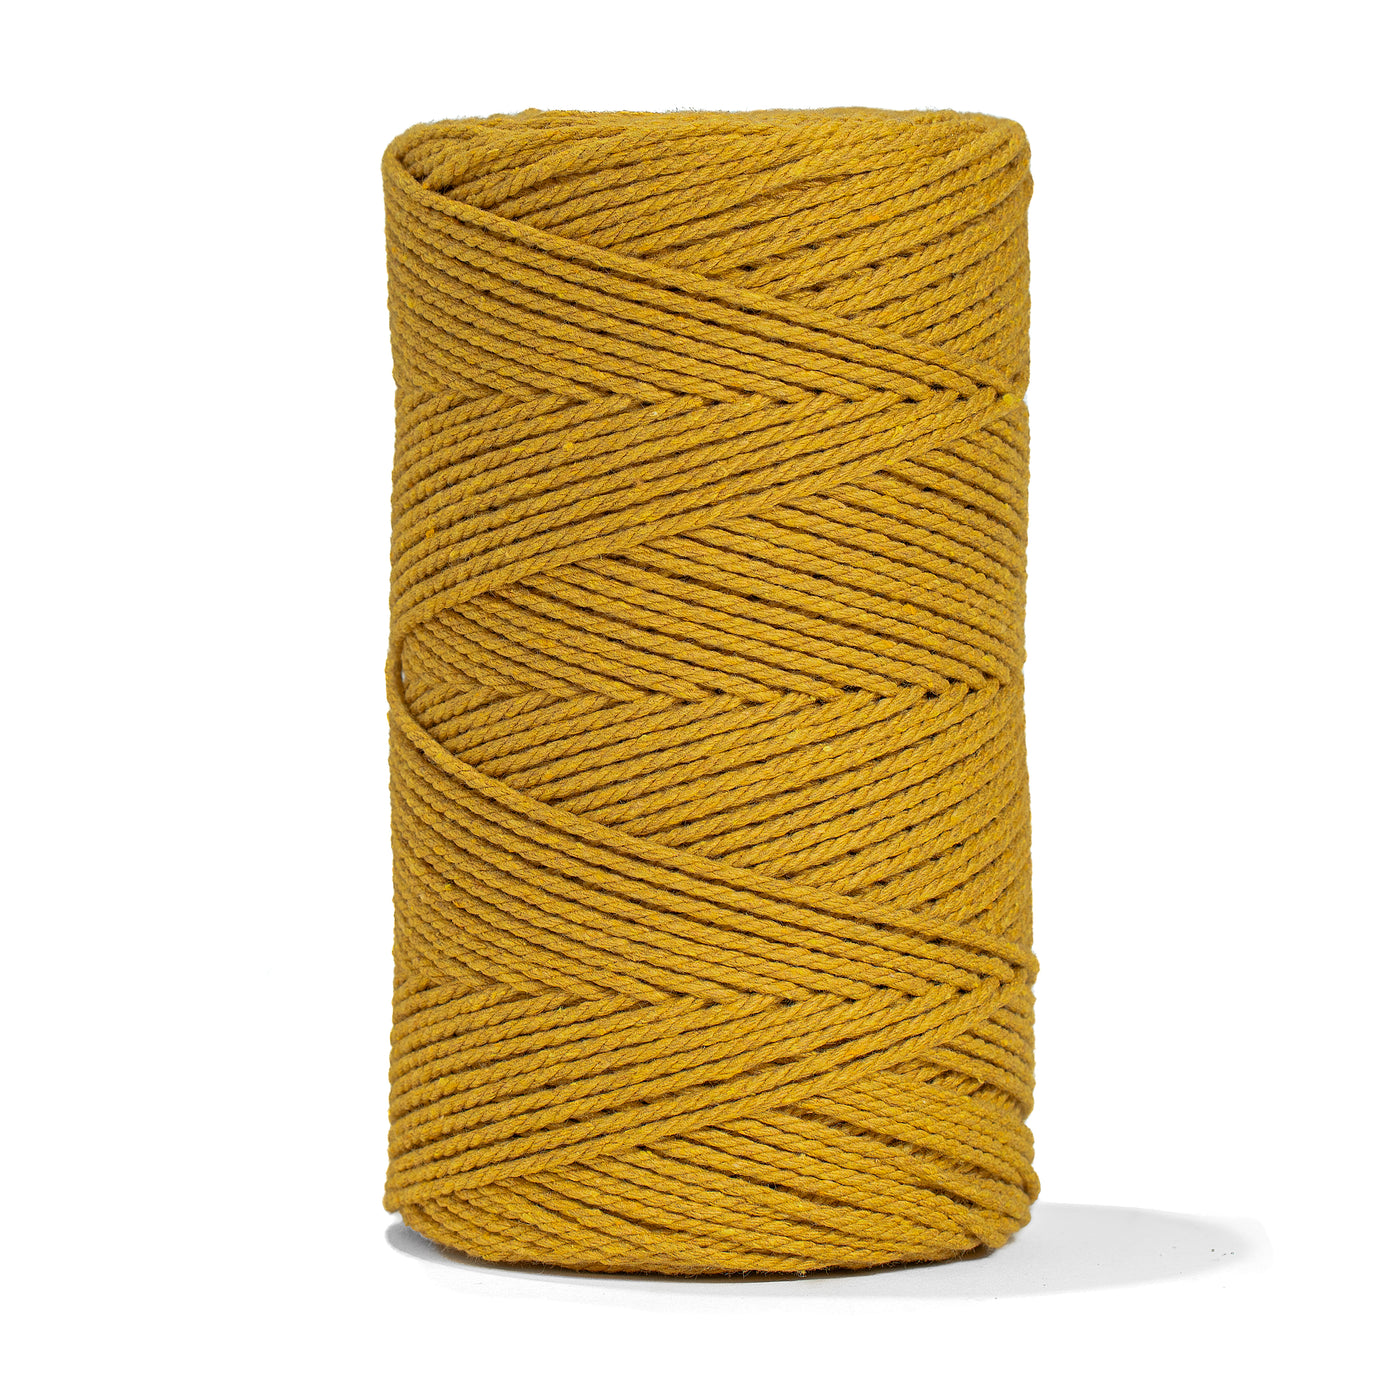 COTTON ROPE ZERO WASTE 2 MM - 3 PLY - MUSTARD COLOR